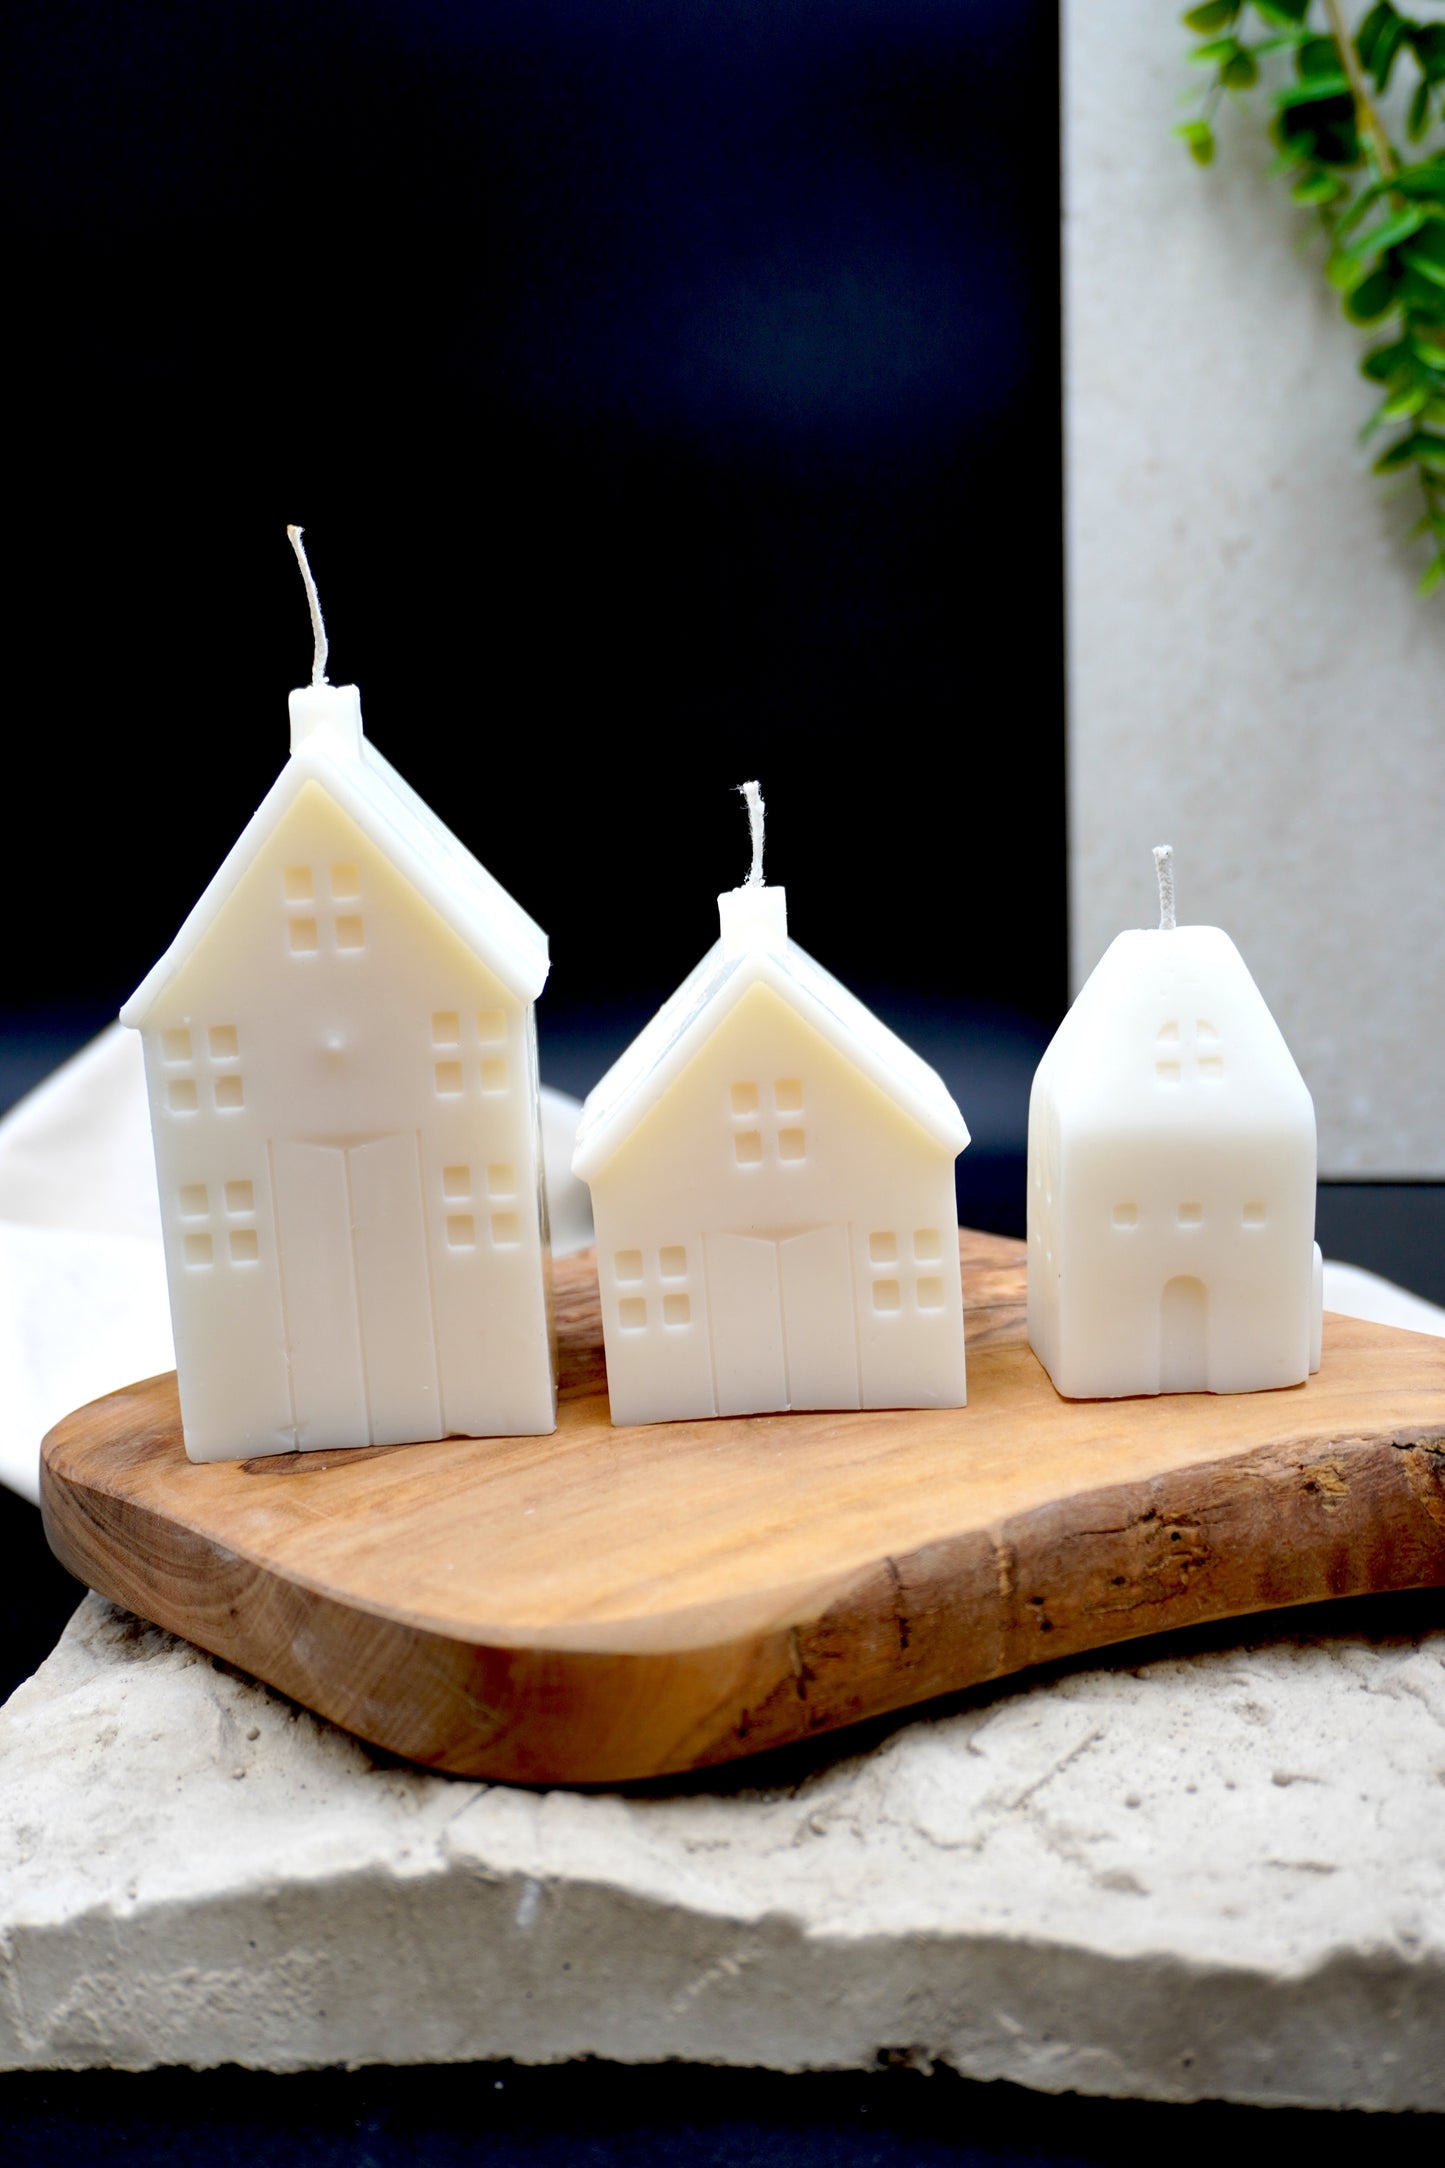 The Home Candle set